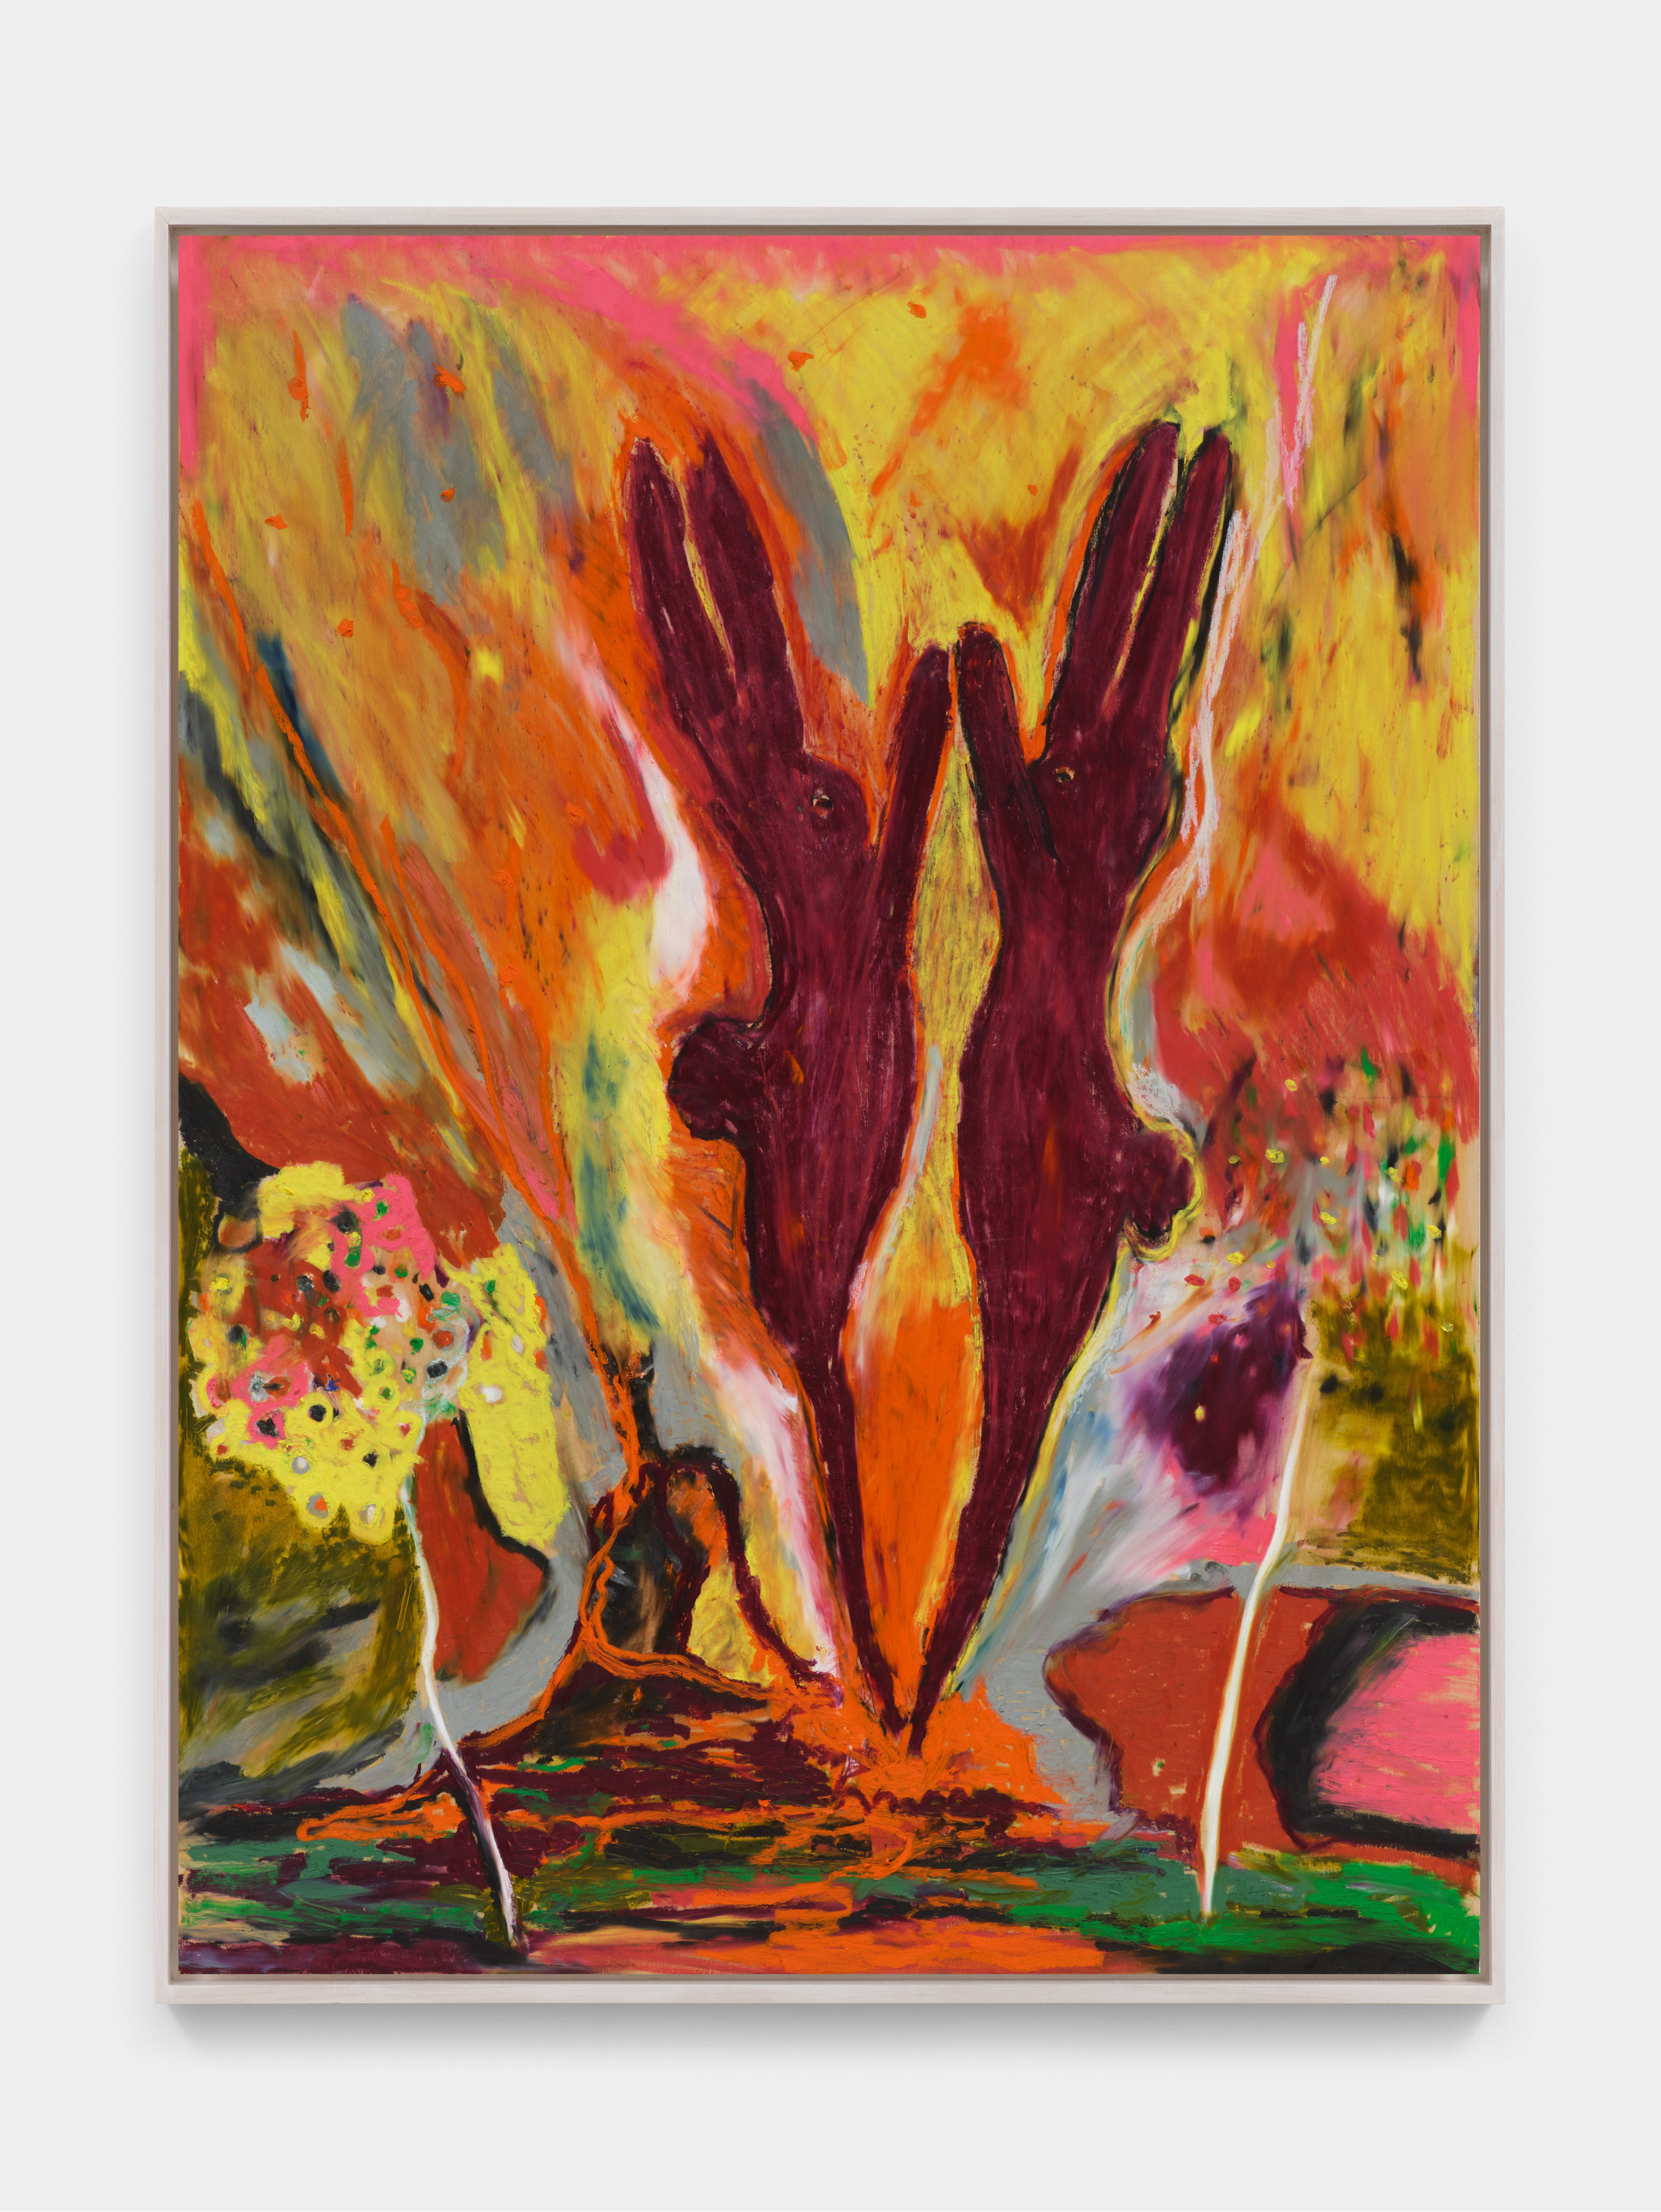 An oil on wood panel painting of two red bunnies rejoicing in front of flowers and an exploding volcano surrounded by orange and yellow plumes.